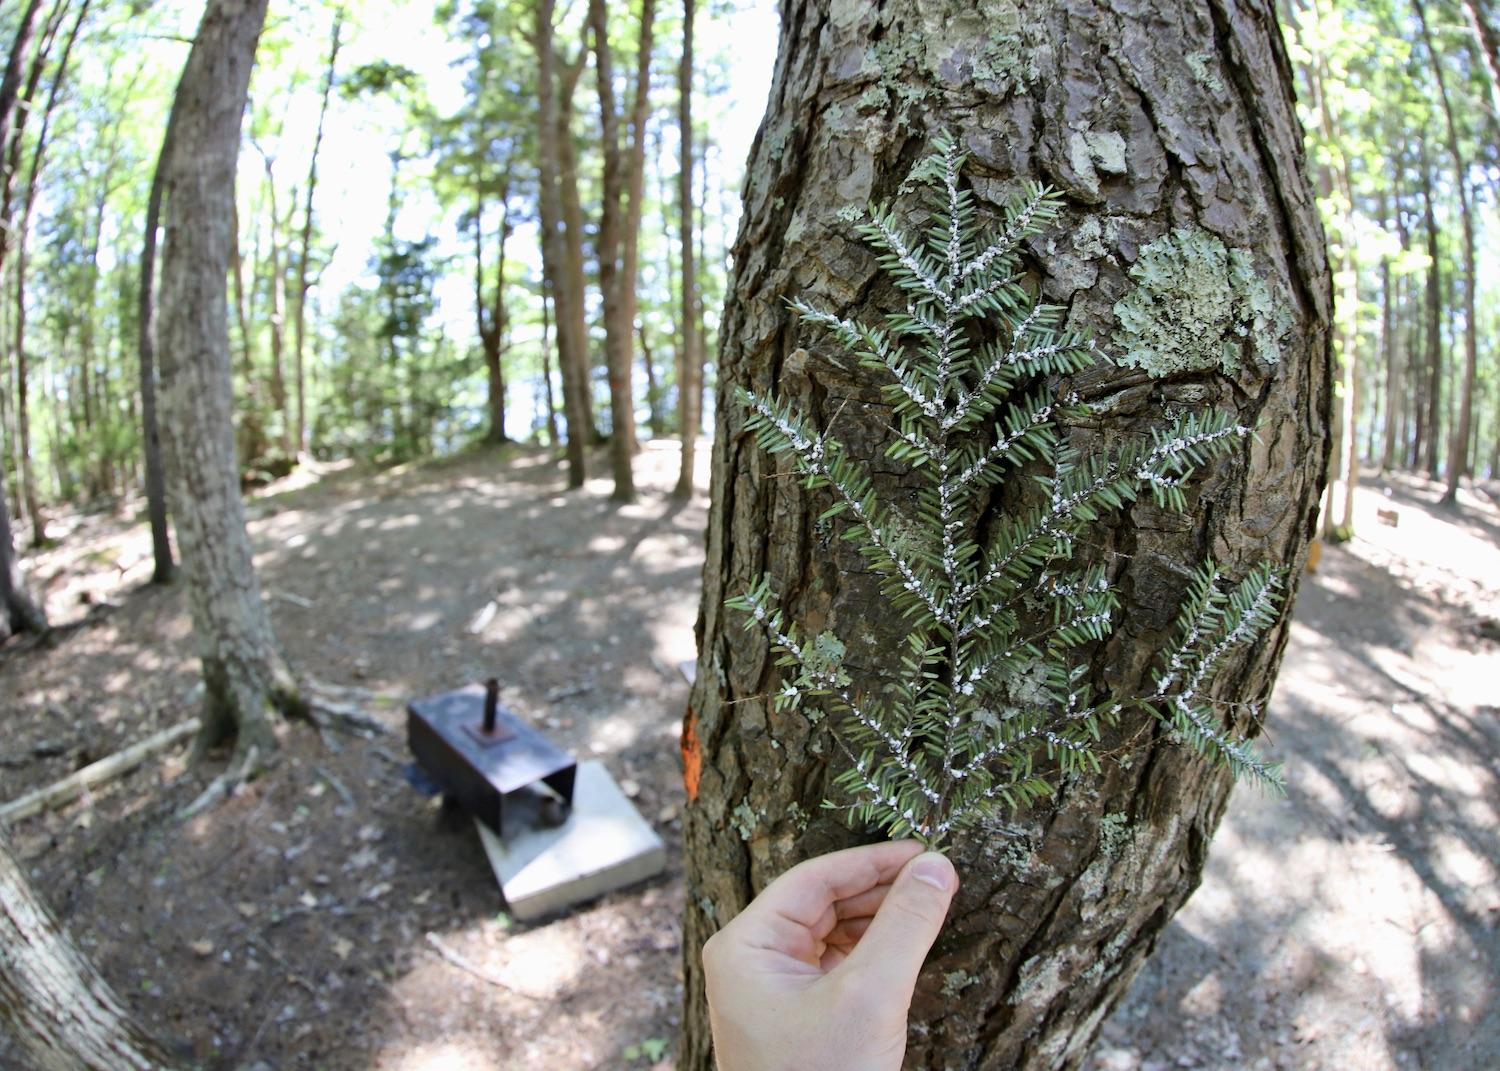 This file photo shows a hemlock branch that's heavily infested with HWA.